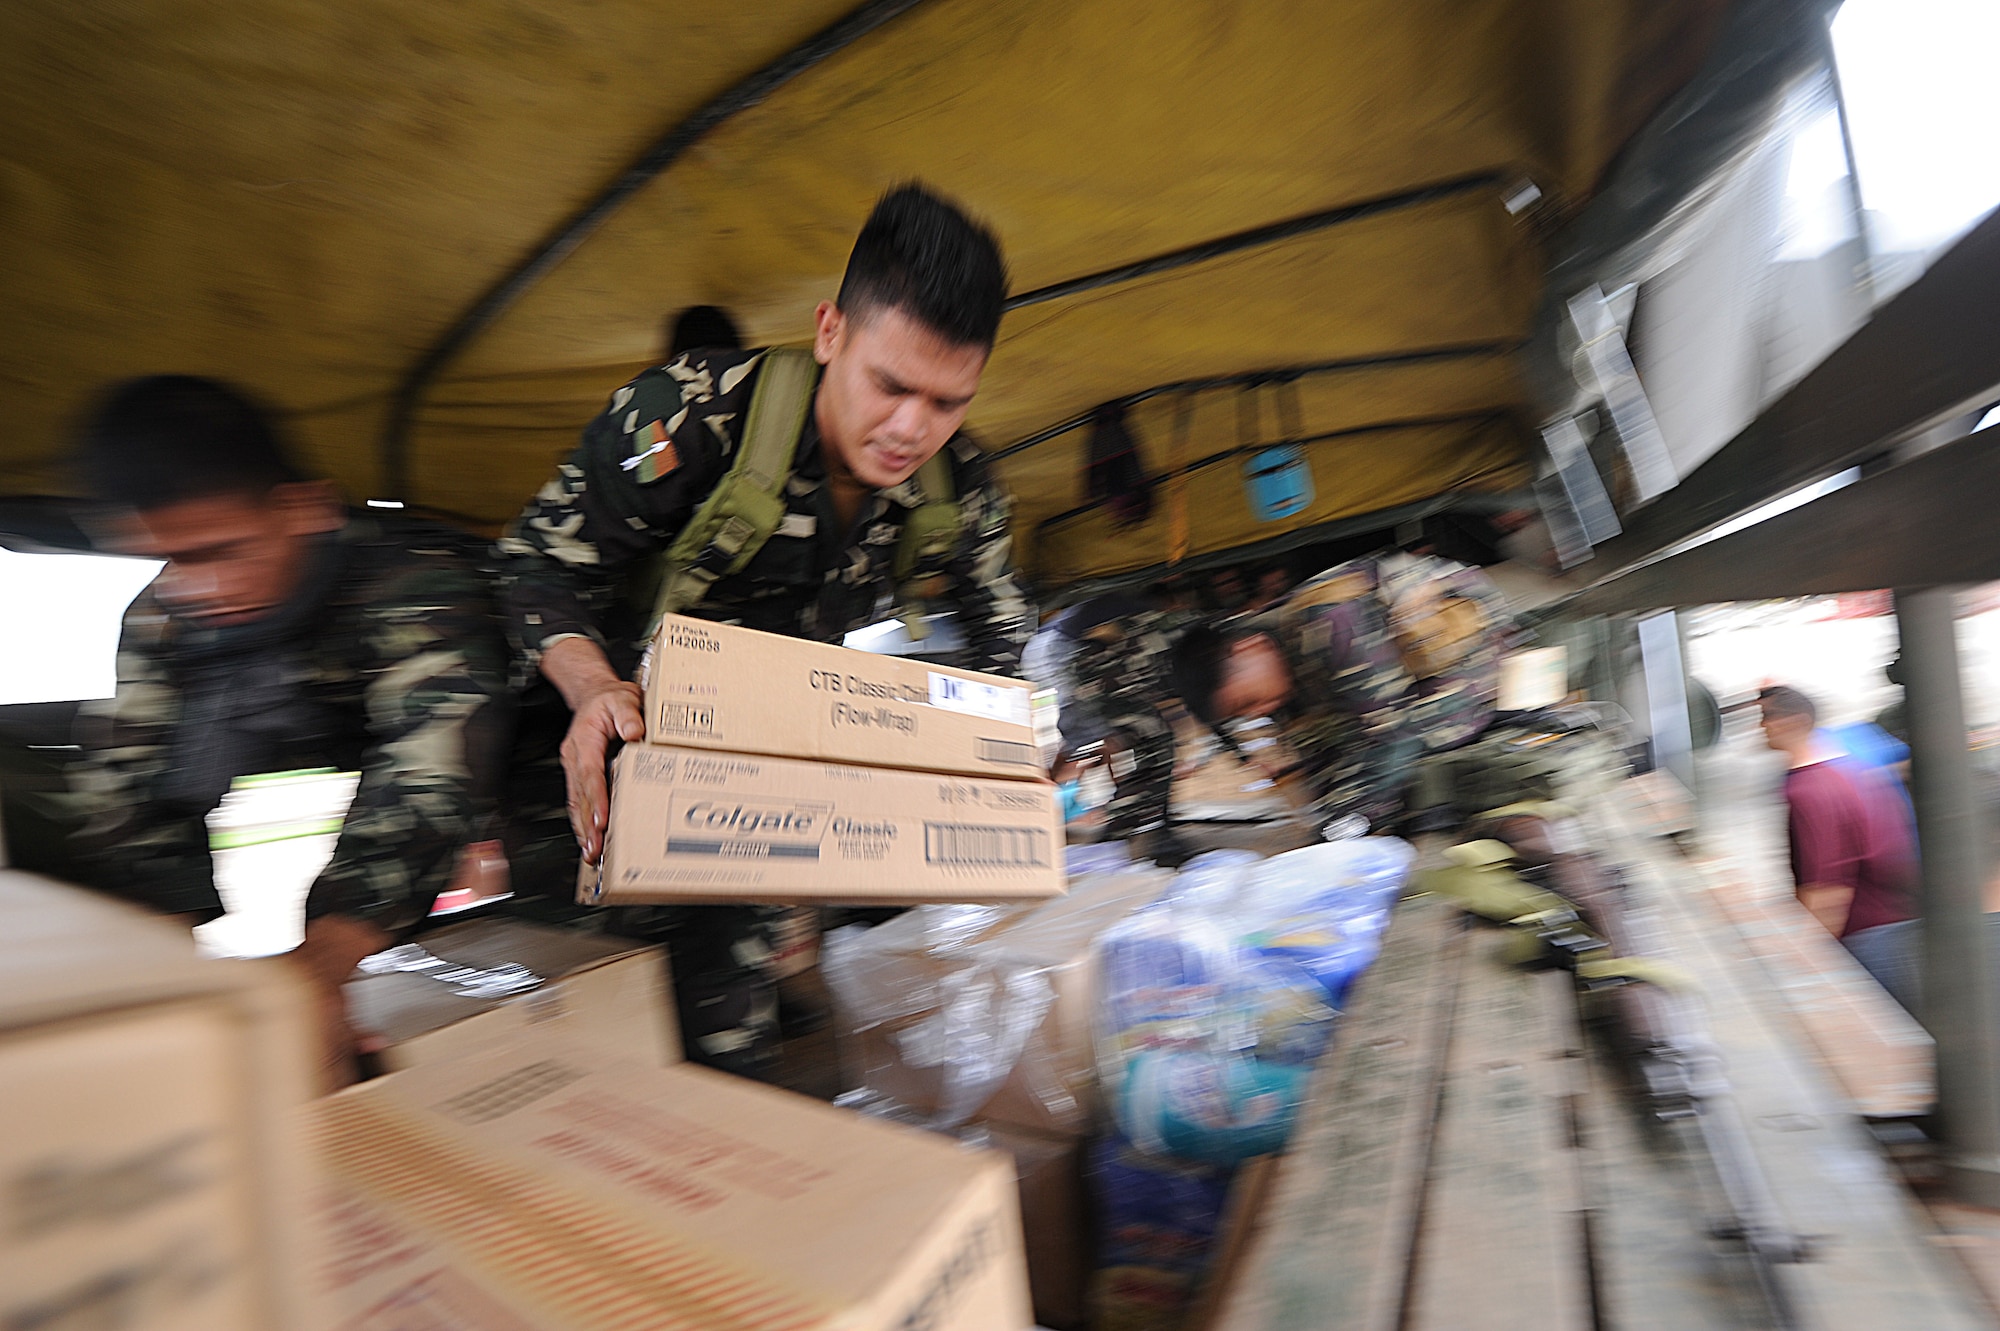 Members of the Armed Forces of the Philippines and U.S. military members transfer supplies from a U.S. Air Force C-130 Hercules with the 133rd Airlift Wing to an Armed Forces of the Philippines vehicle in support of Operation Pacific Angel Philippines at Tagbiliran Airport, Philippines, Aug. 13, 2015. Pacific Angel is a multilateral humanitarian assistance civil military operation, which improves military-to-military partnerships in the Pacific while also providing medical health outreach, civic engineering projects and subject matter exchanges among partner forces. (U.S. Air Force photo by Tech. Sgt. Aaron Oelrich/Released)